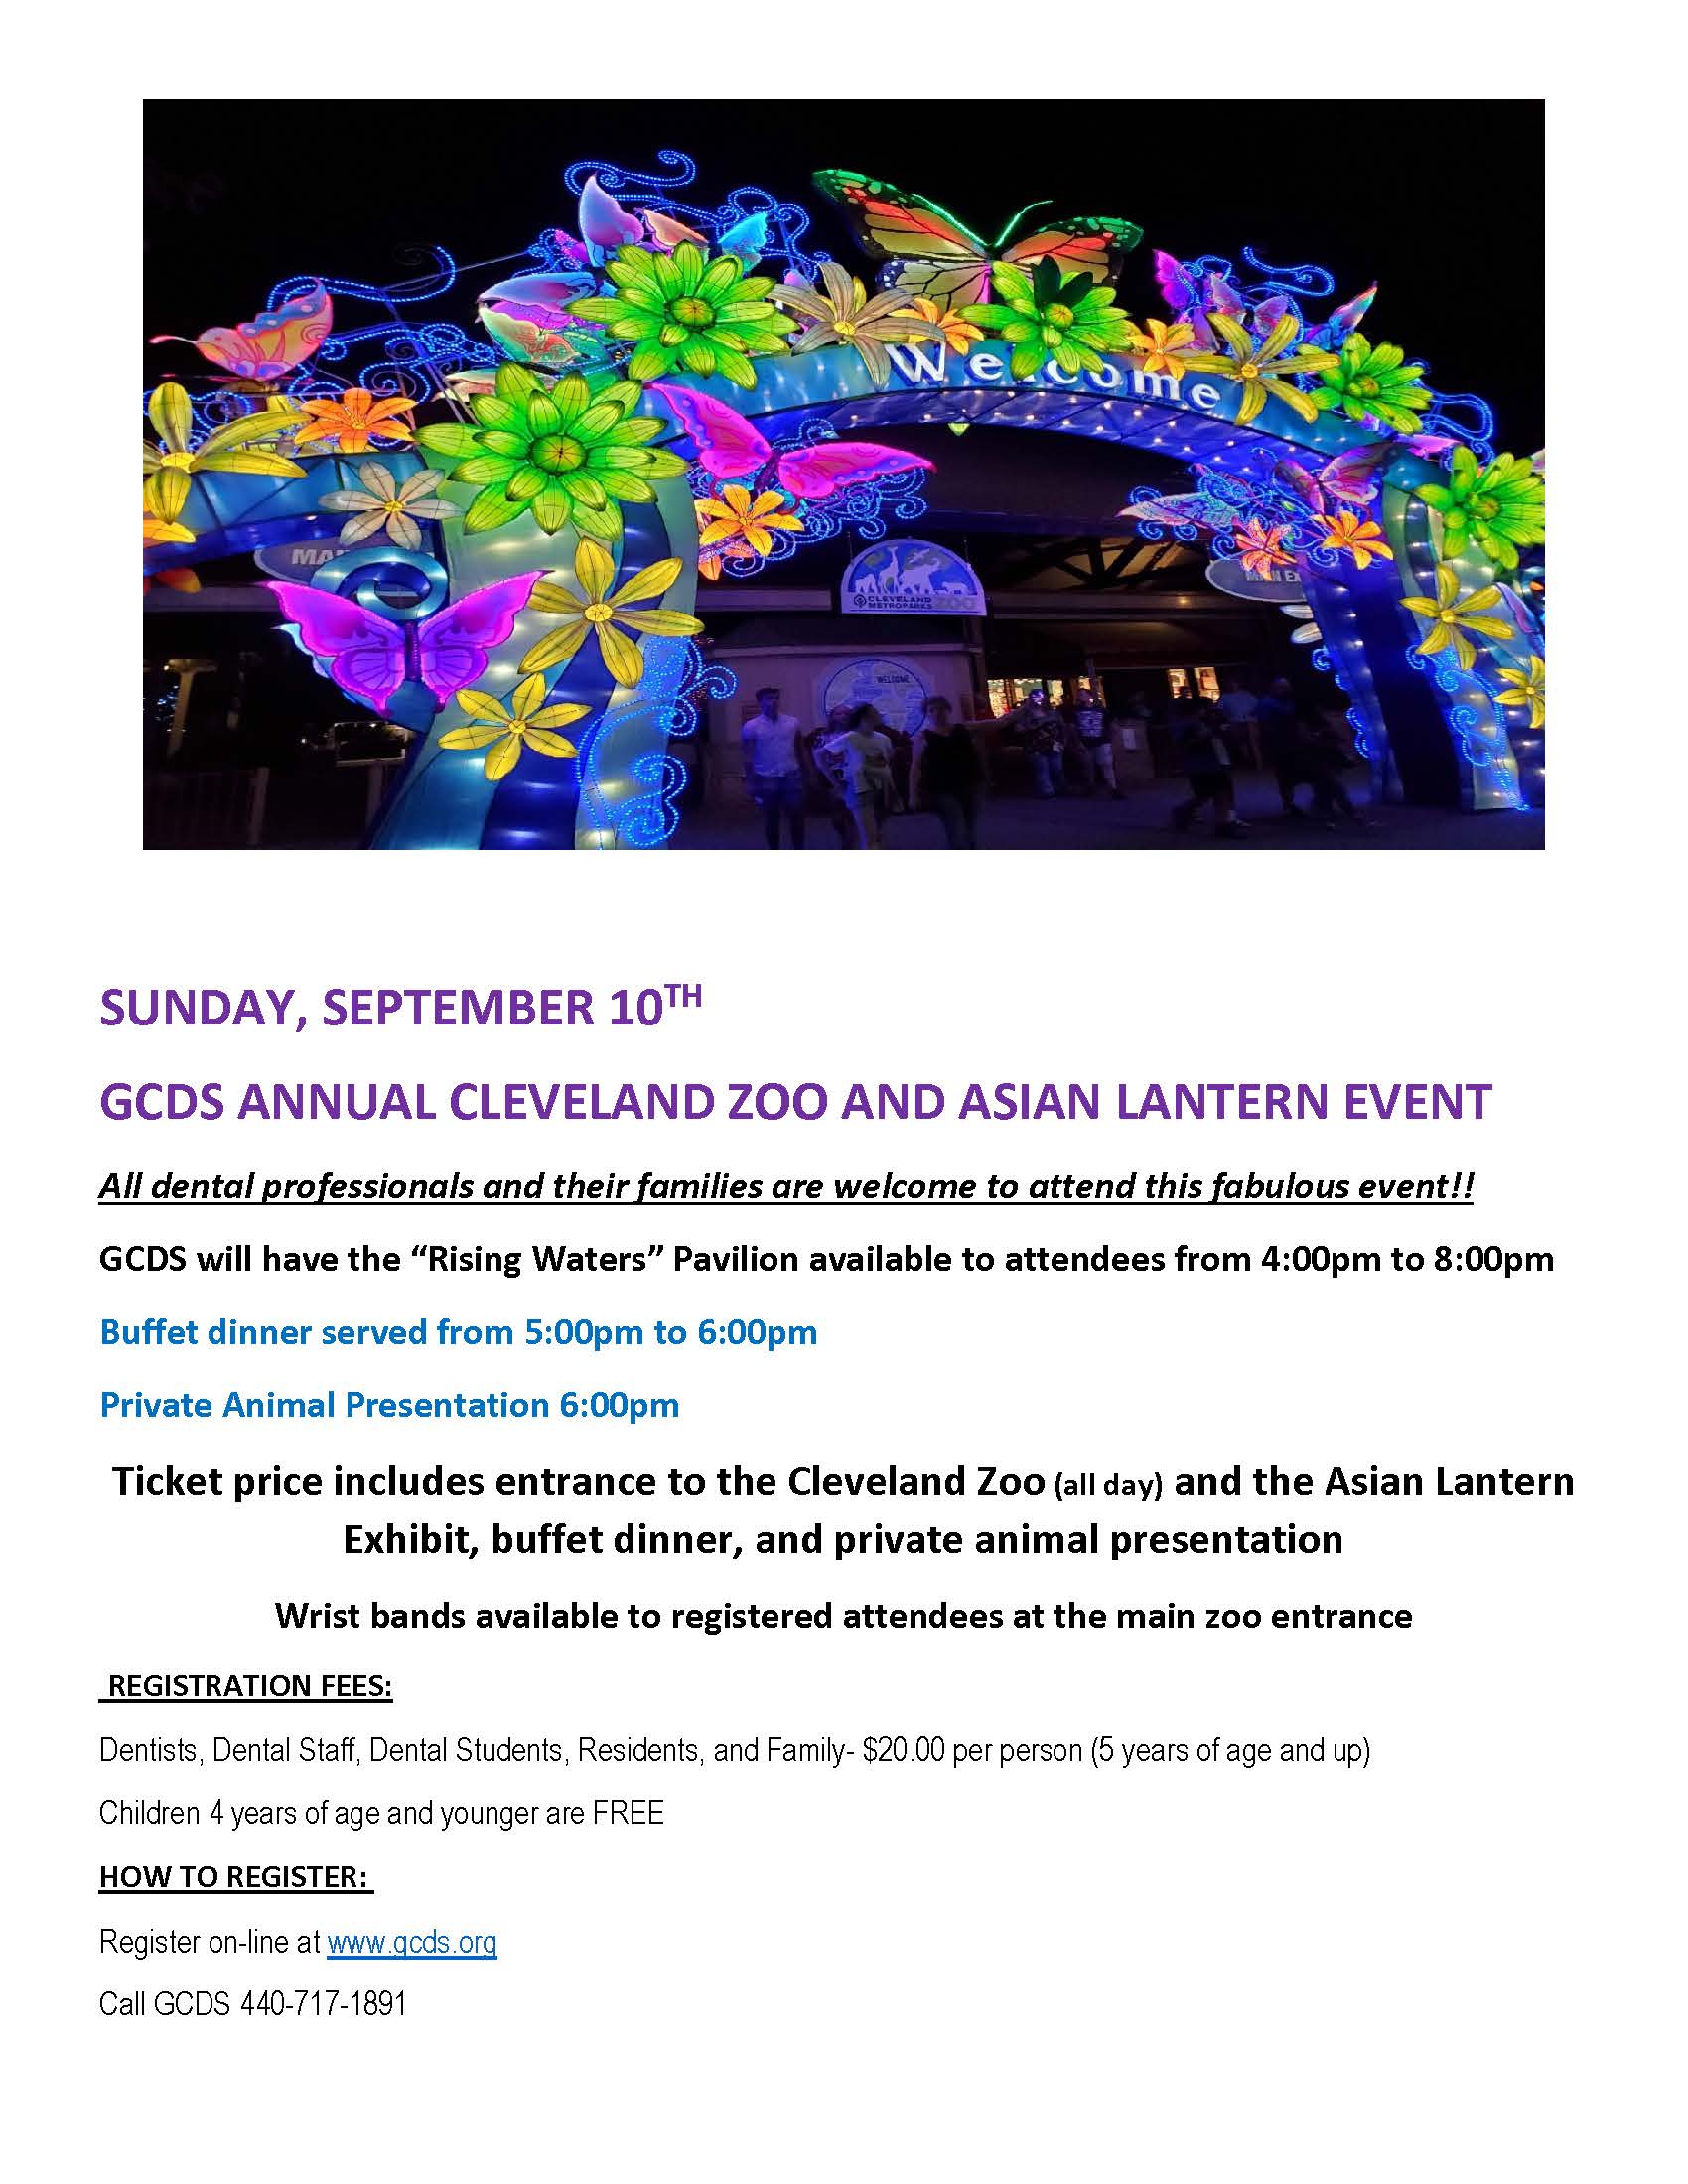 Cleveland Zoo/Asian Lantern Event